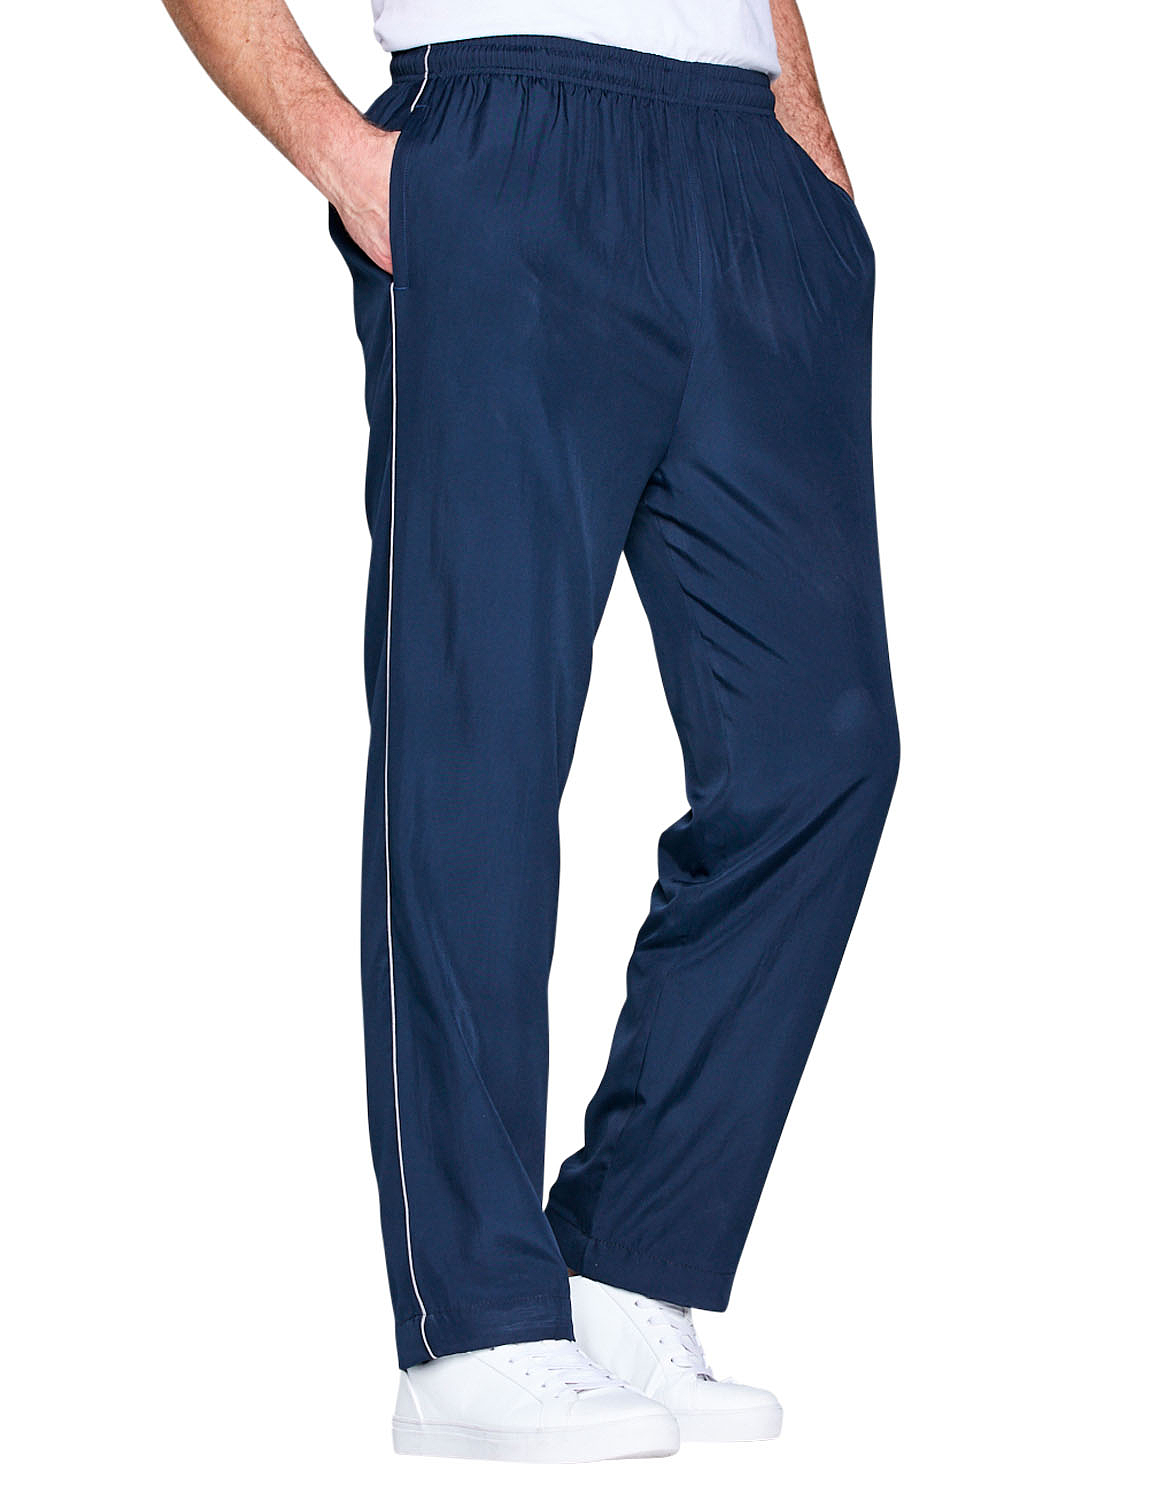 Pegasus Mesh Lined Pull on Track Pant | Chums